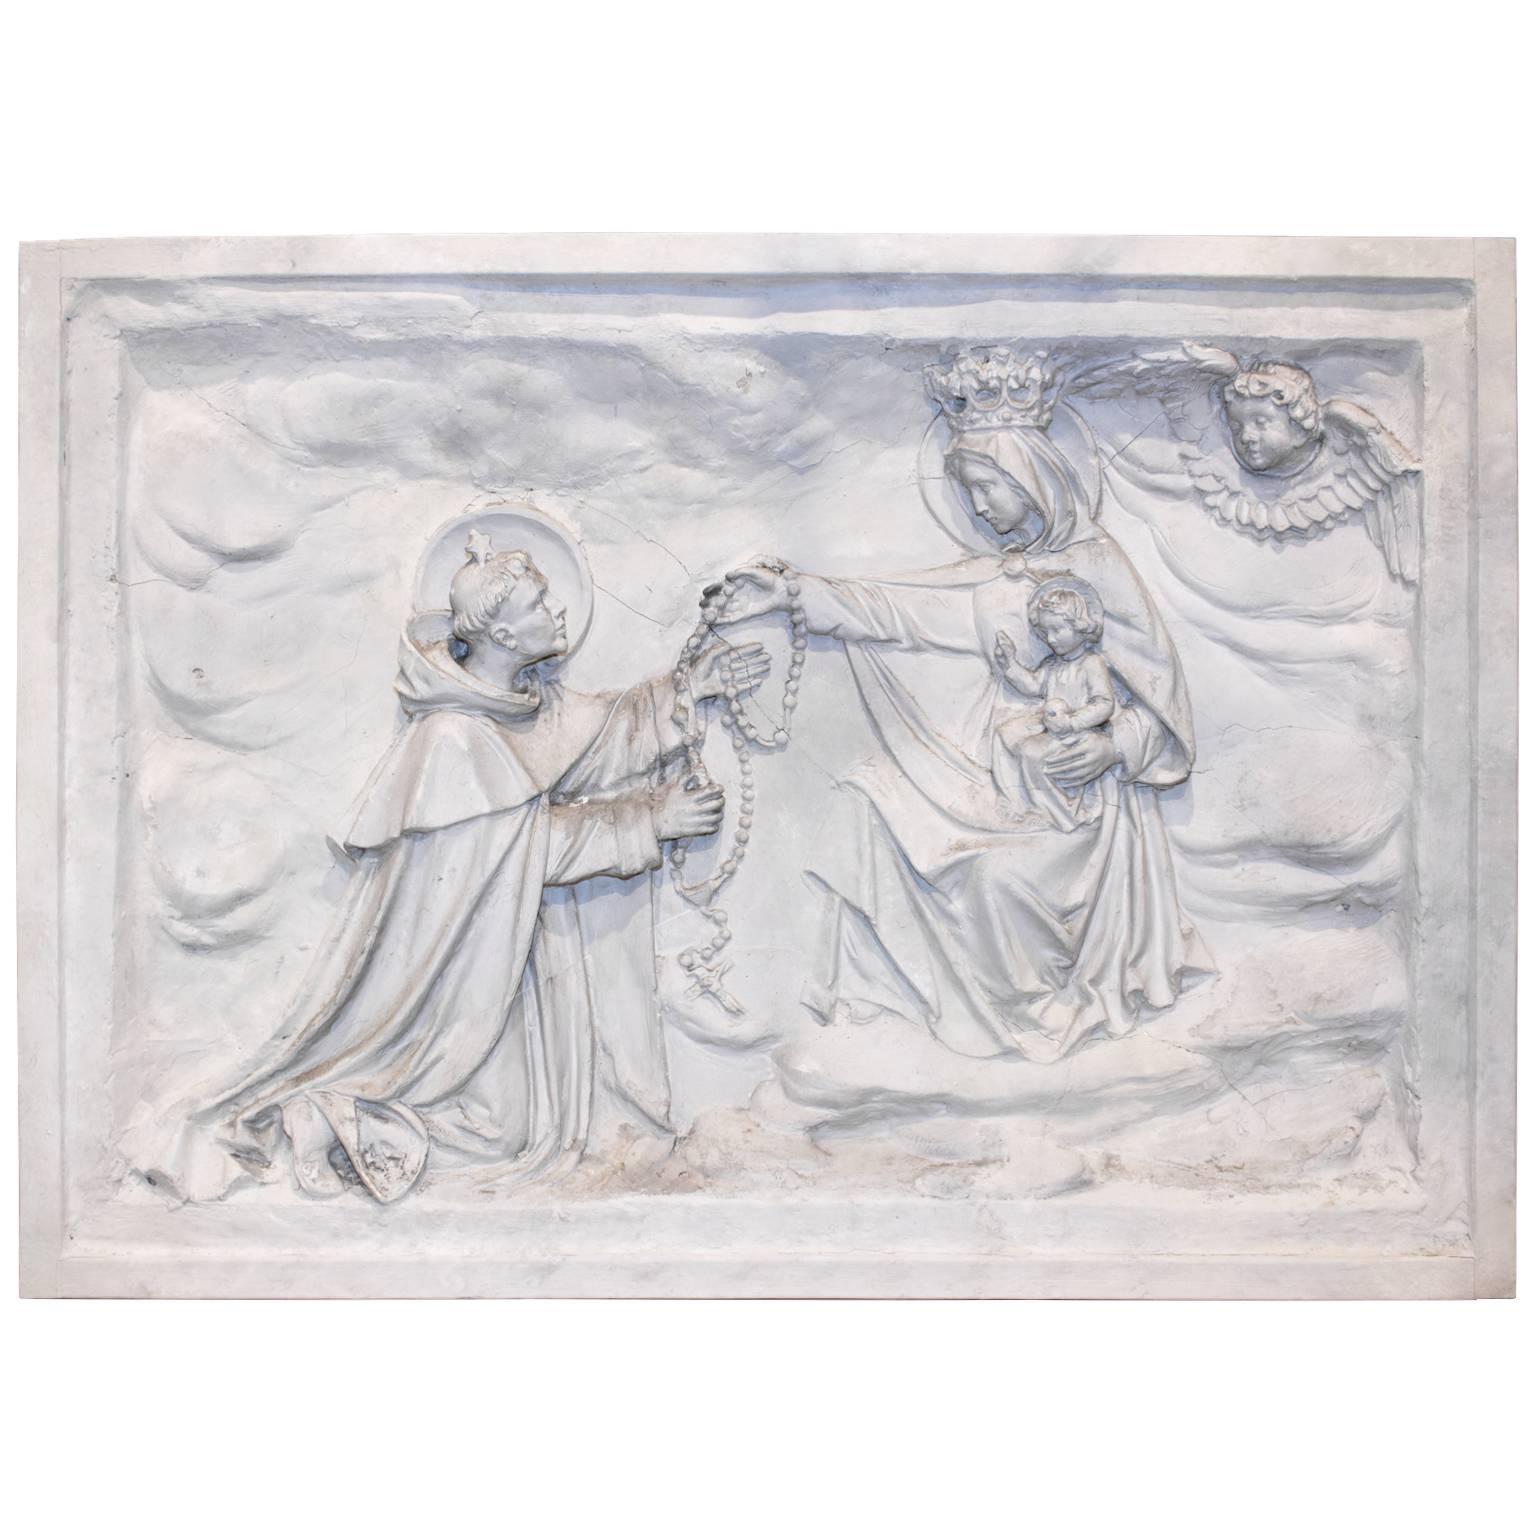 Truly a very special one of a kind large-scale religious piece dating to the early 1800s, this large plaster bas relief features the lovely iconic image of Saint Dominic receiving the Rosary from the Blessed Virgin Mary while the infant Jesus sits